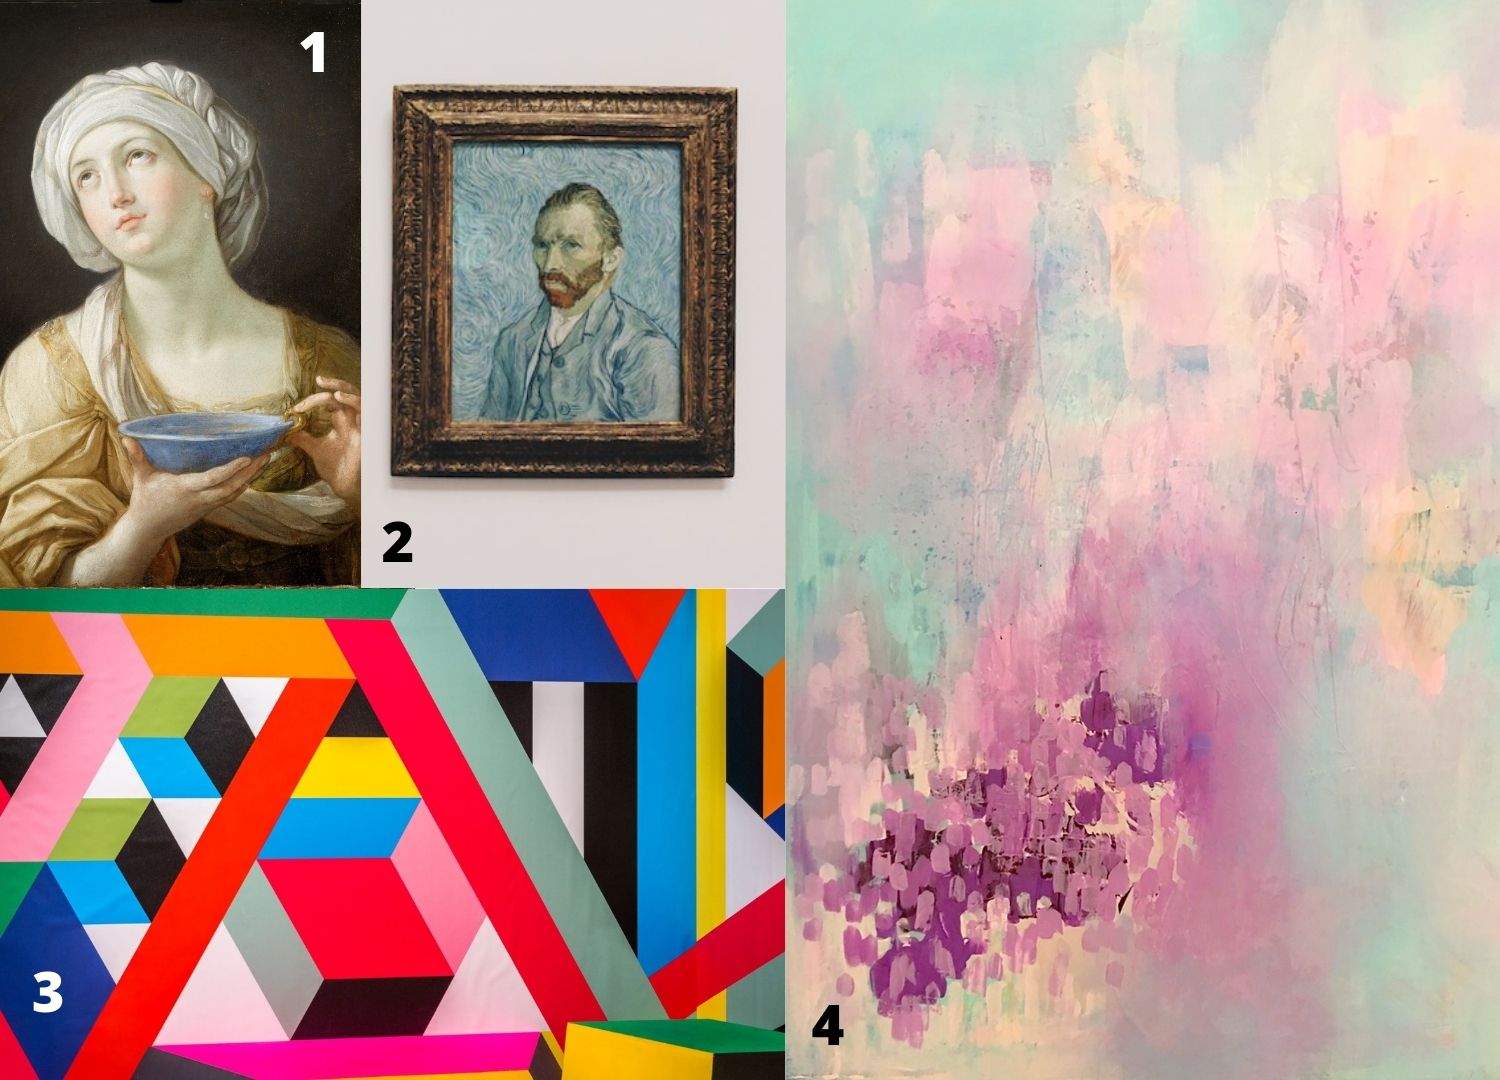 4 different art styles put together in a collage, modern art, abstract, realism, van gogh